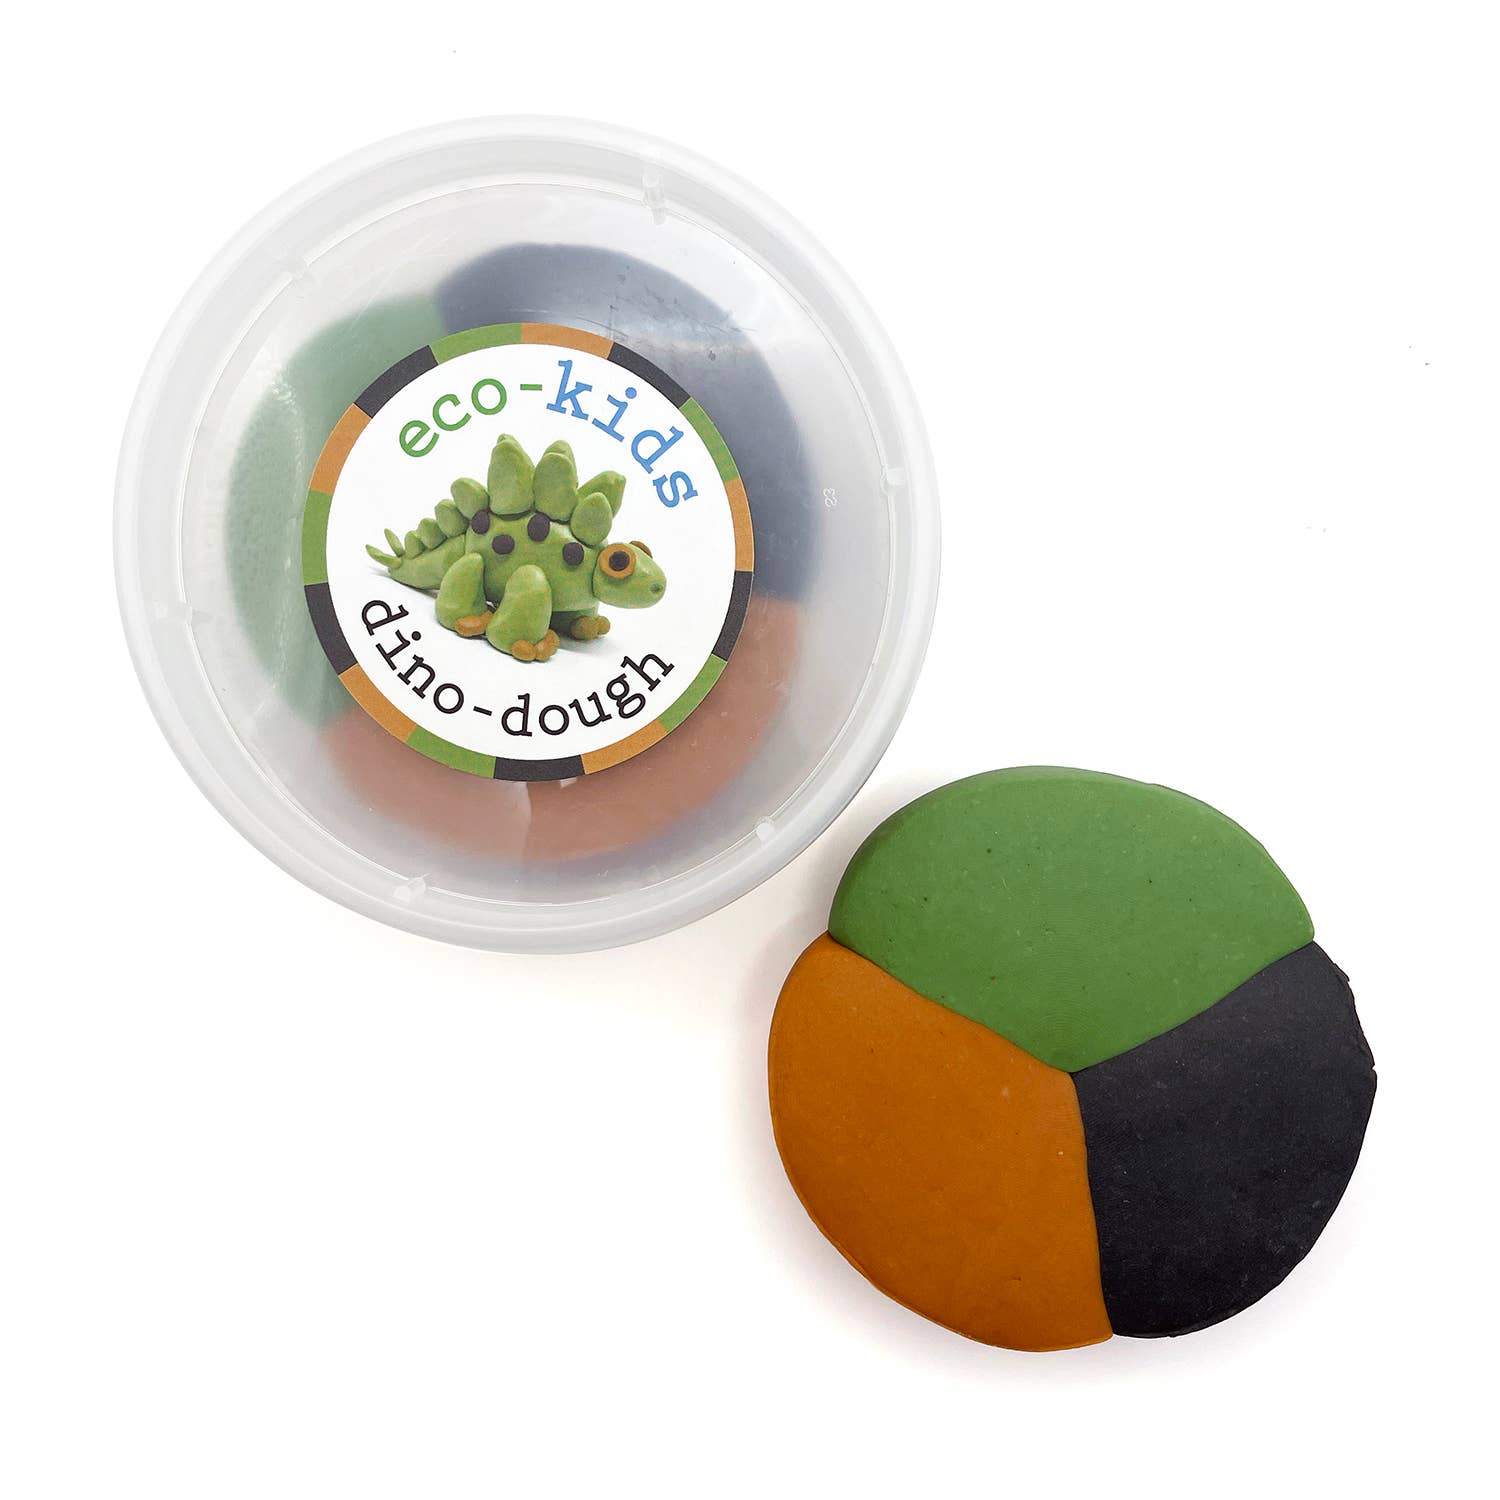 eco-kids - dinosaur playdough  eco-kids   -better made easy-eco-friendly-sustainable-gifting